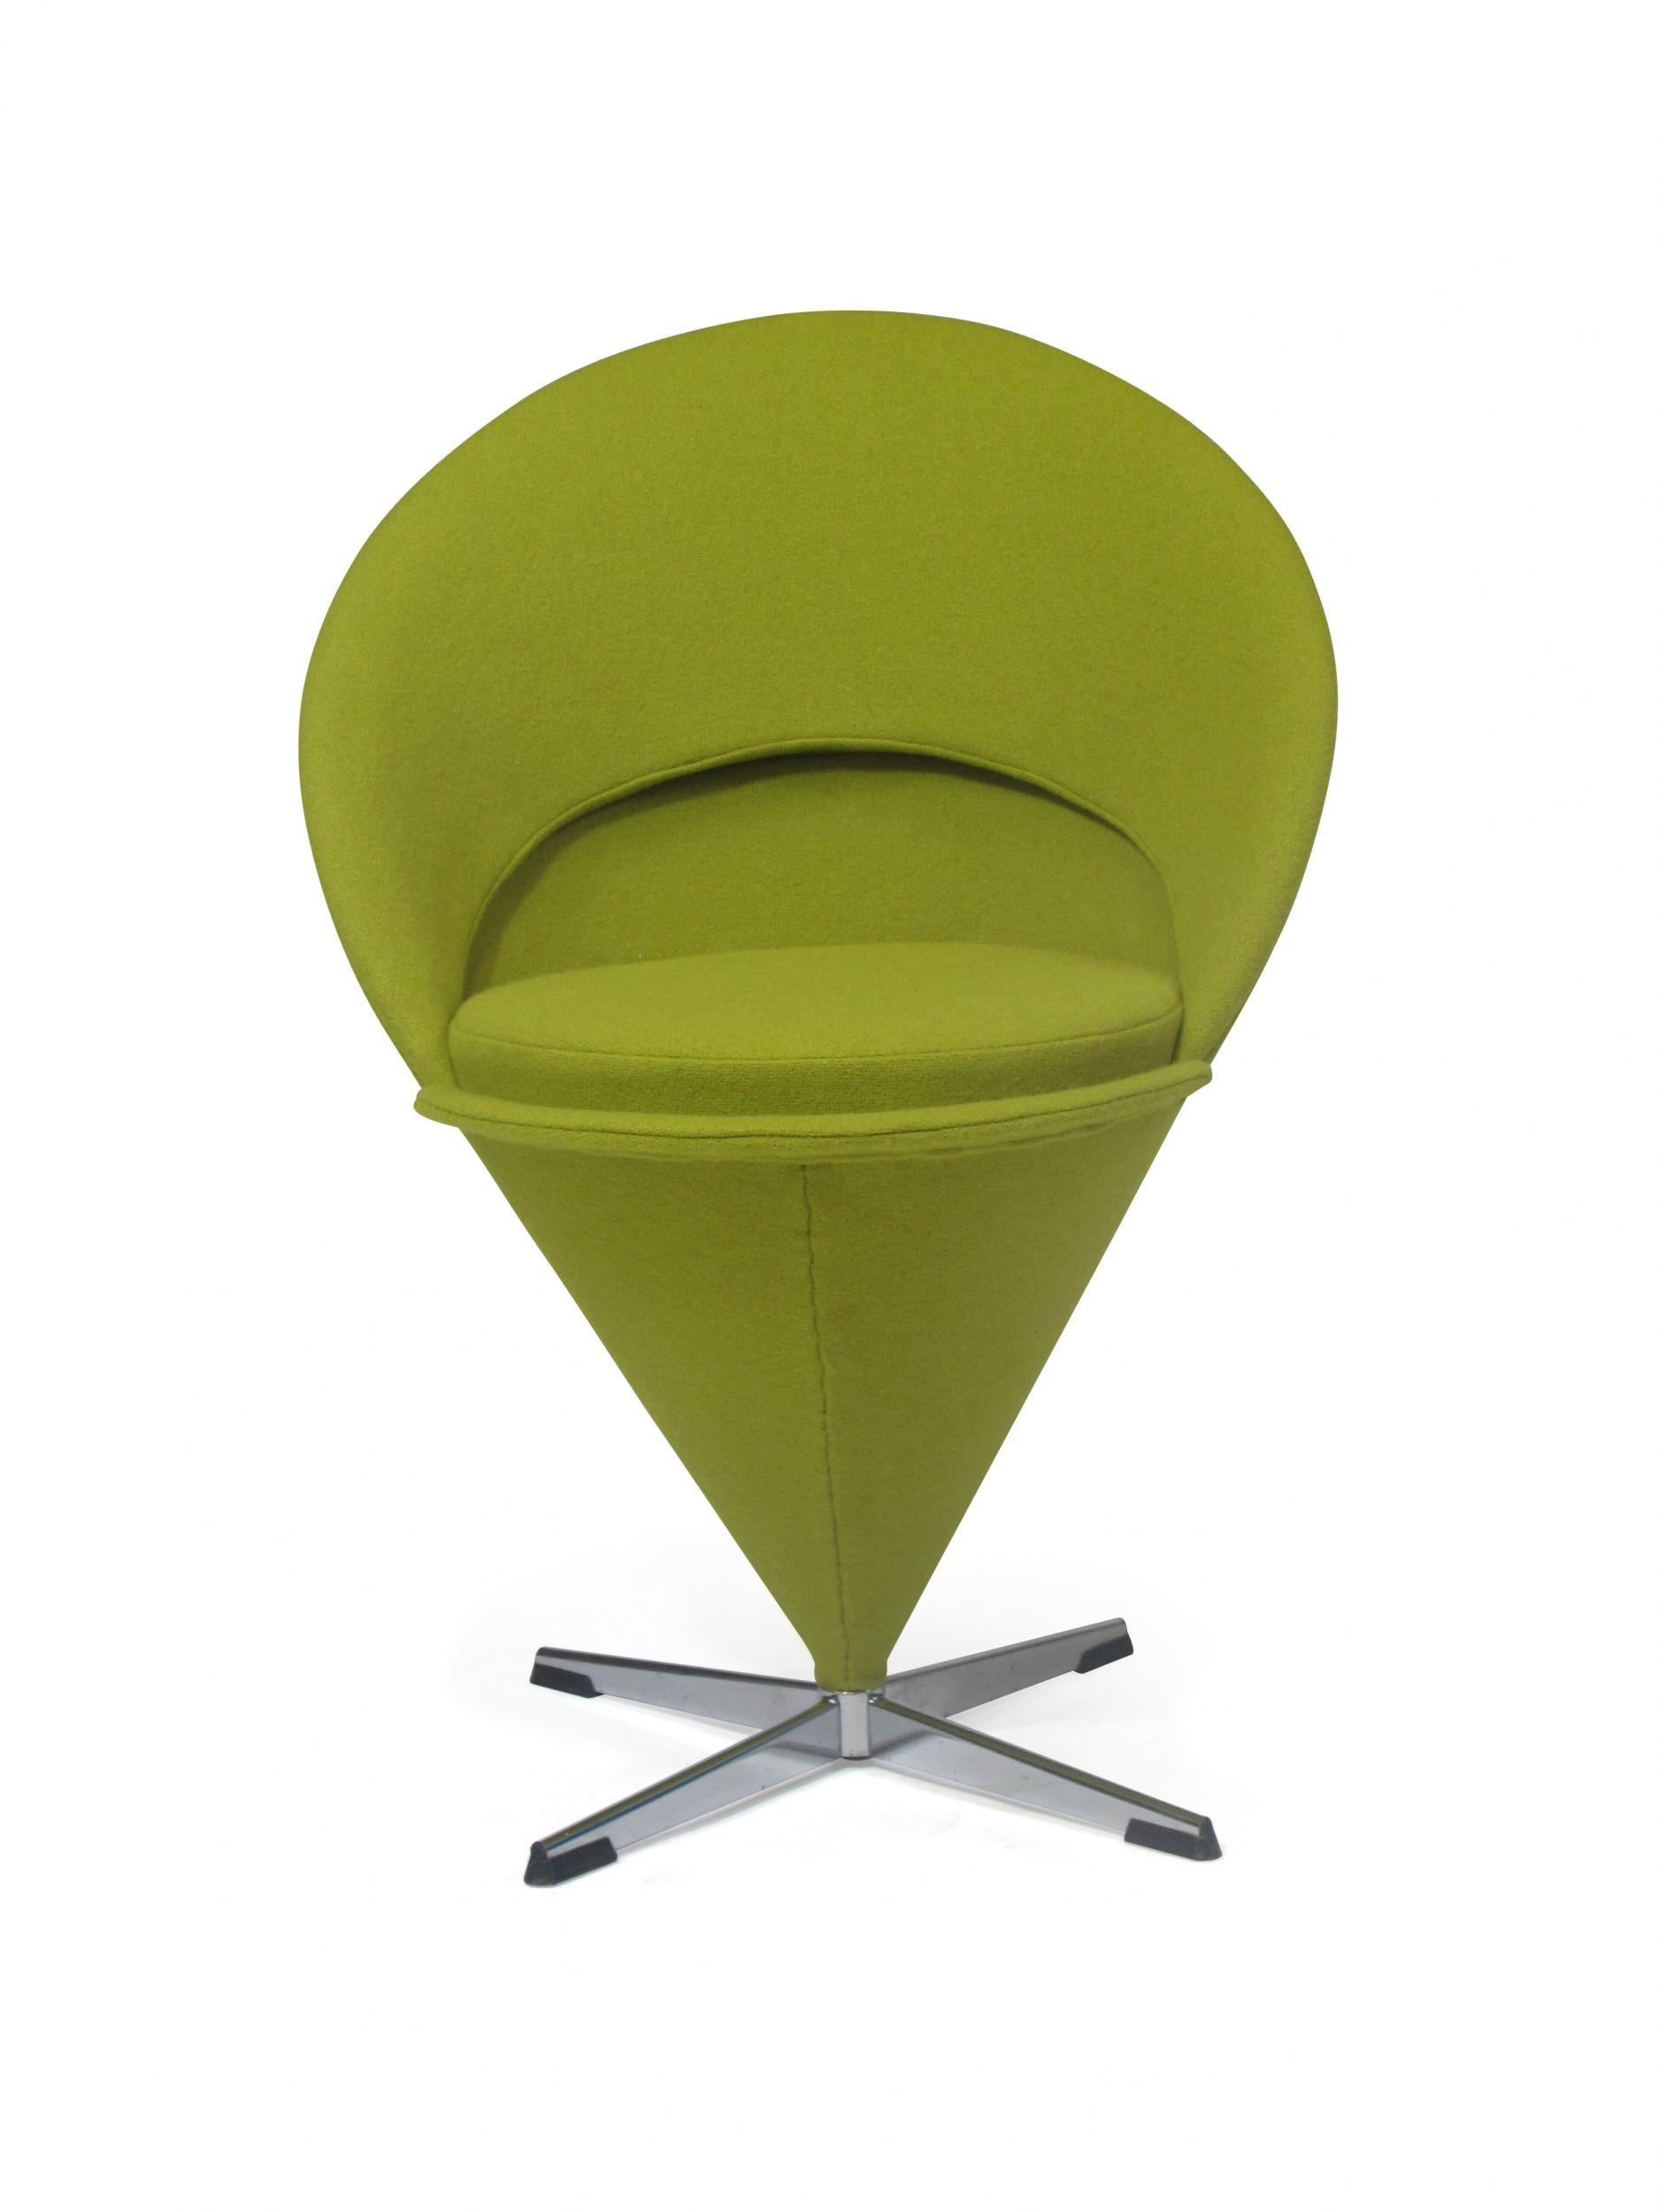 Verner Panton for Richard Nissen heart chair, circa 1959, Denmark. The sculptural iconic chair has been fully re-upholstered in bright lime green wool textile raised on a steel pedestal base.